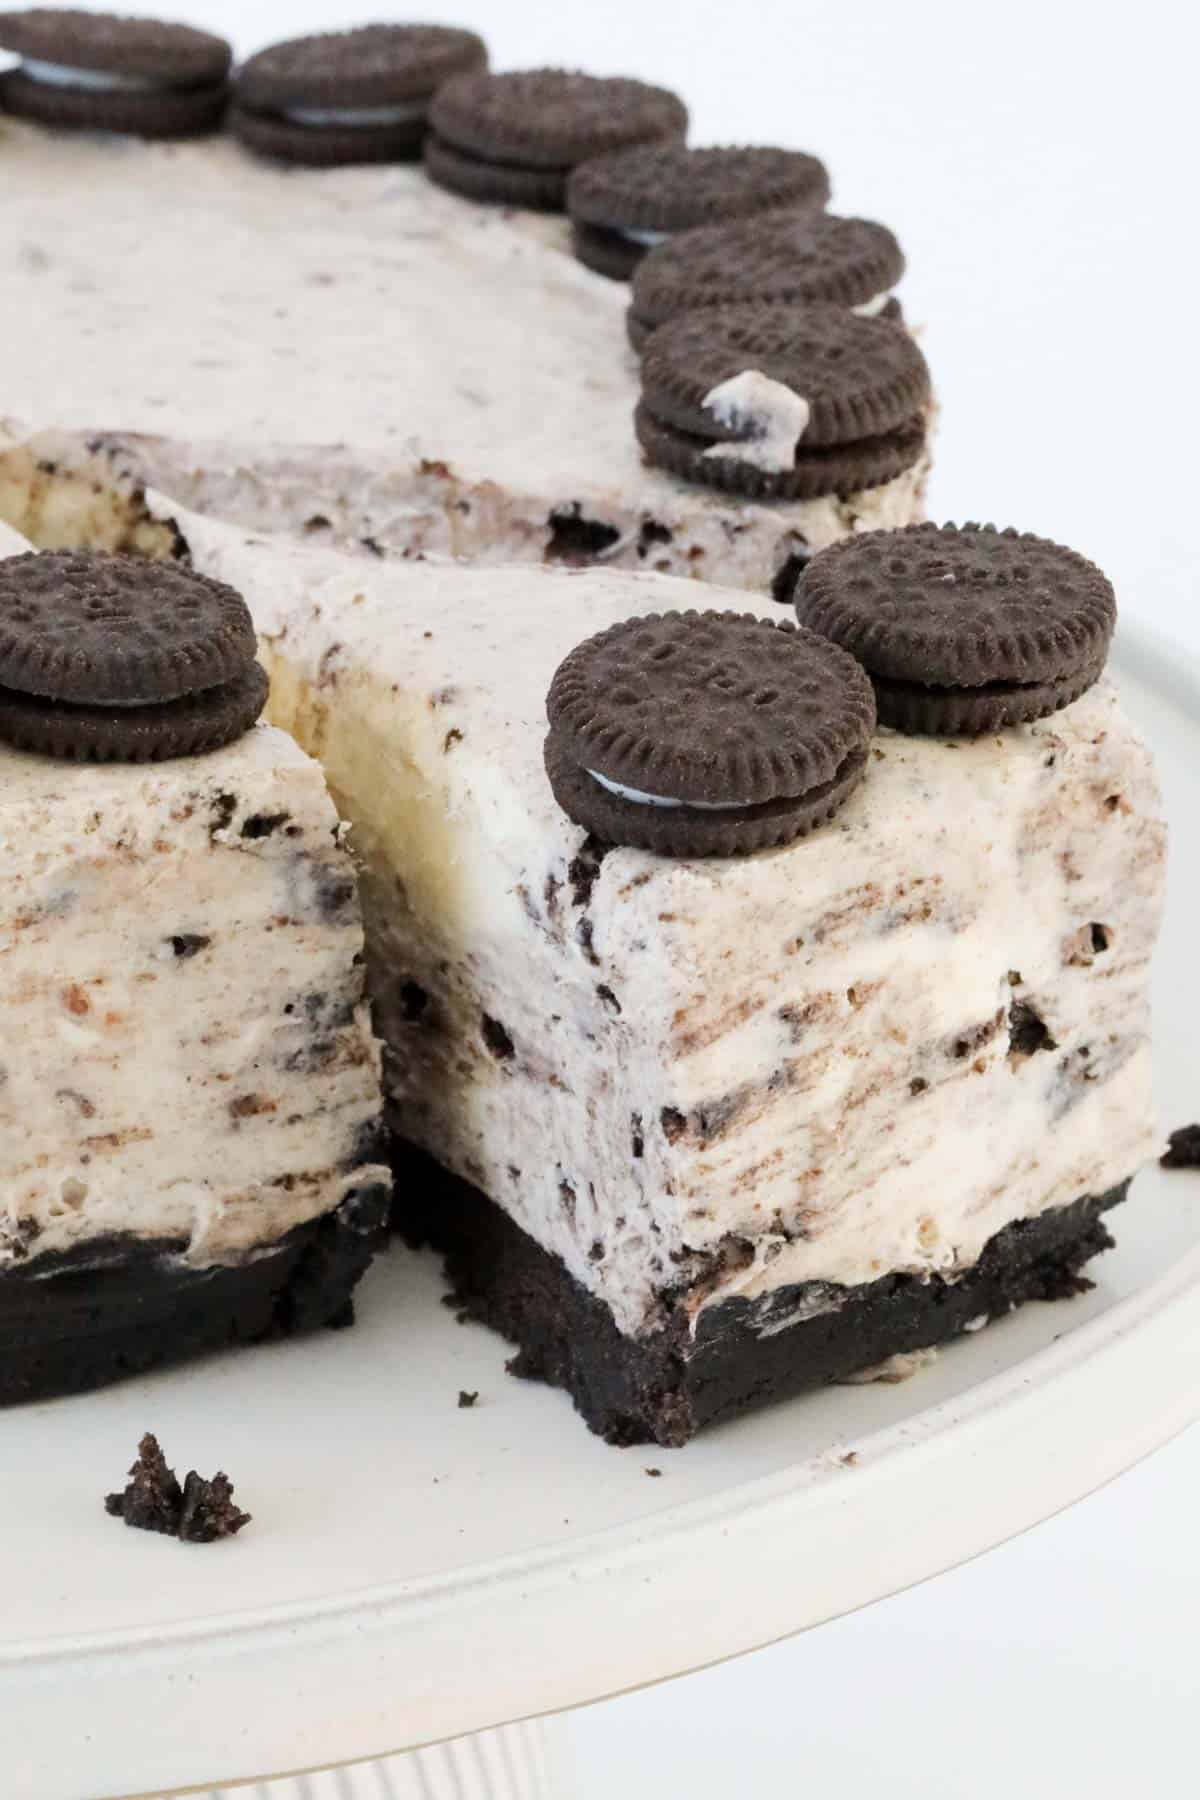 A side view of a slice of cookies and cream cheesecake, slightly removed from the rest.